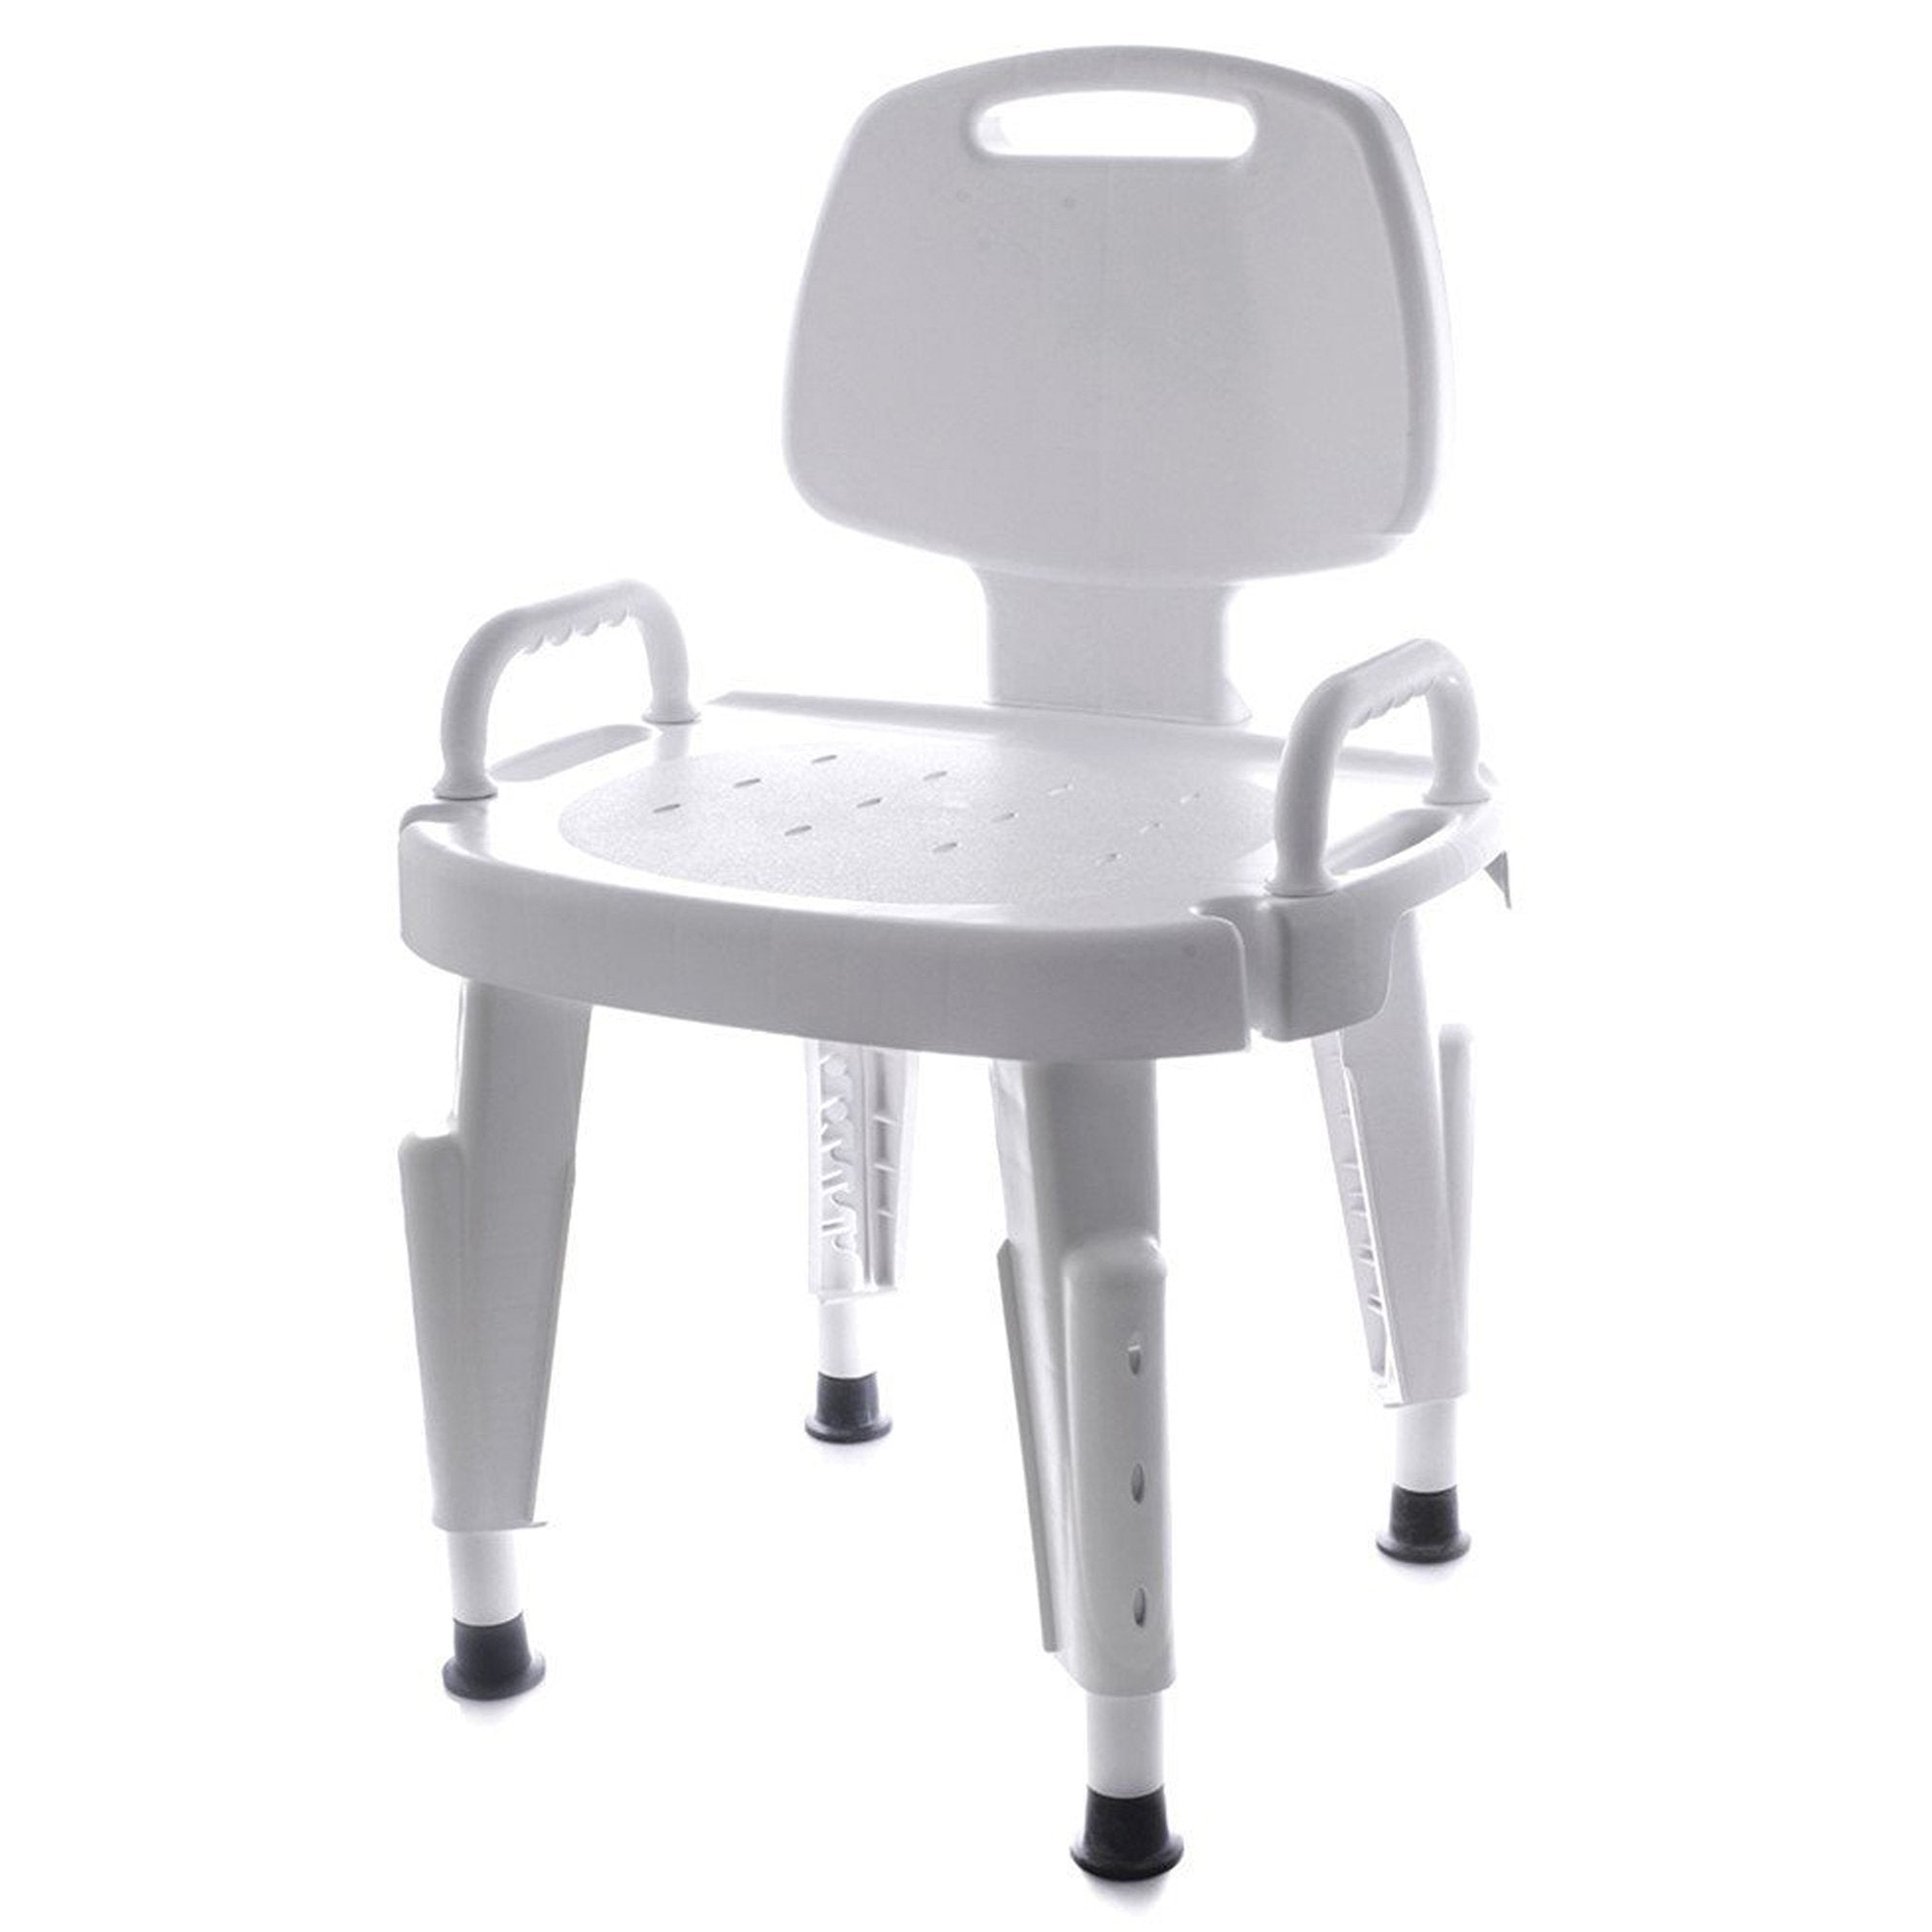 Bath Bench Maddak Removable Arms Plastic Frame With Backrest 17 Inch Seat Width 300 lbs. Weight Capacity